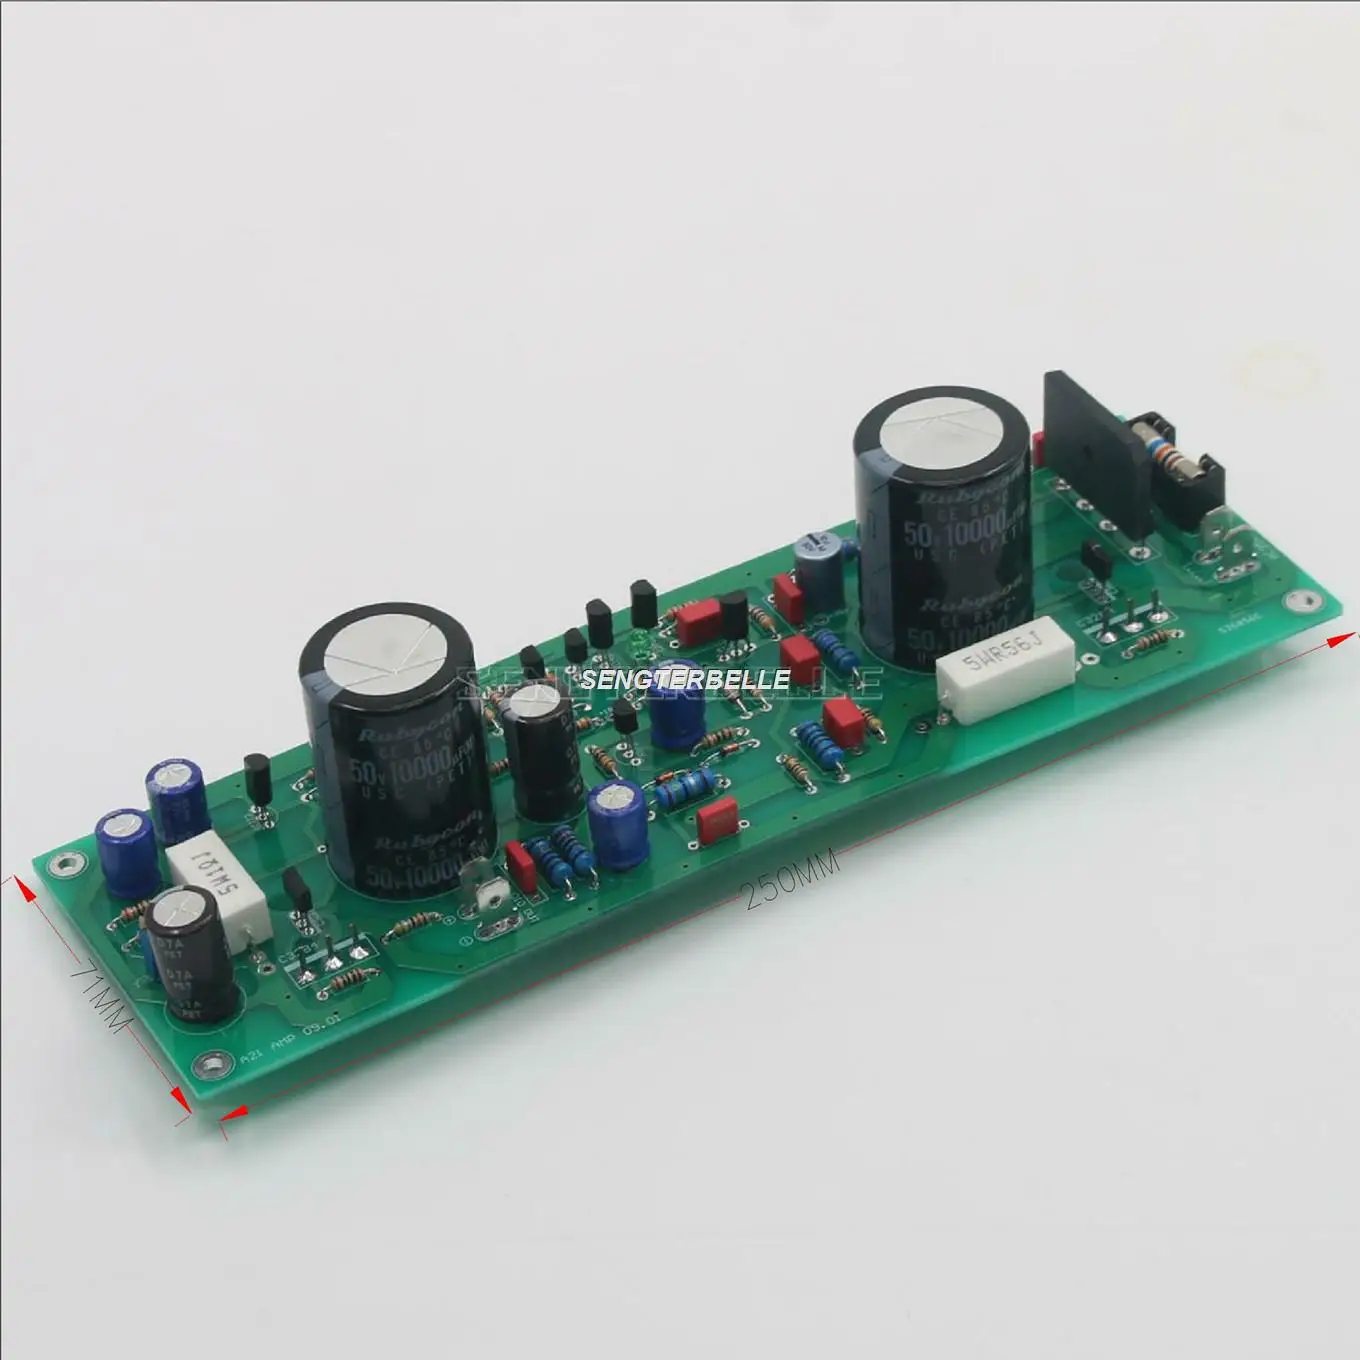 

Assembled Mono 21W Pure Class A Single-Ended Power Amplifier Board Base On Sugden A21 Circuit